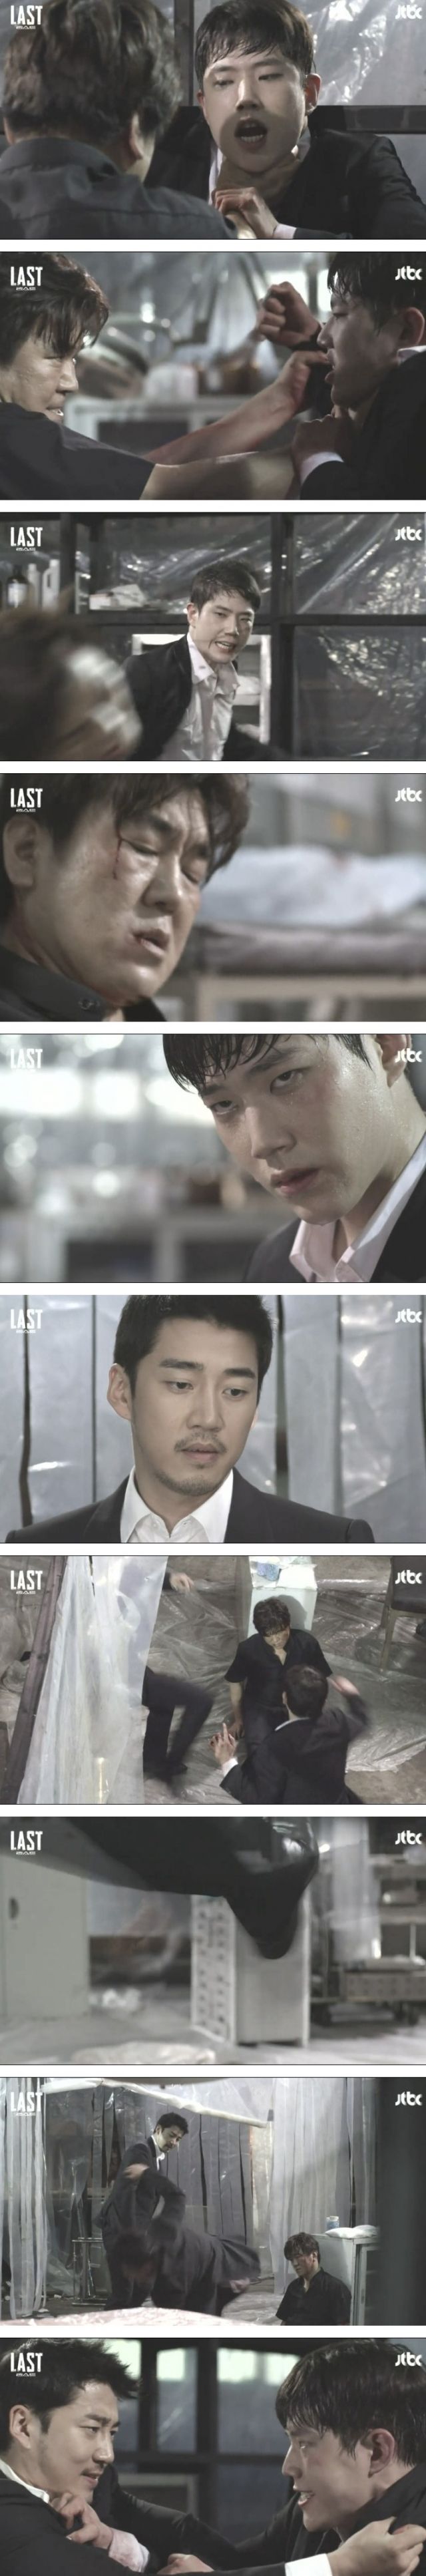 episodes 9 and 10 captures for the Korean drama 'Last'